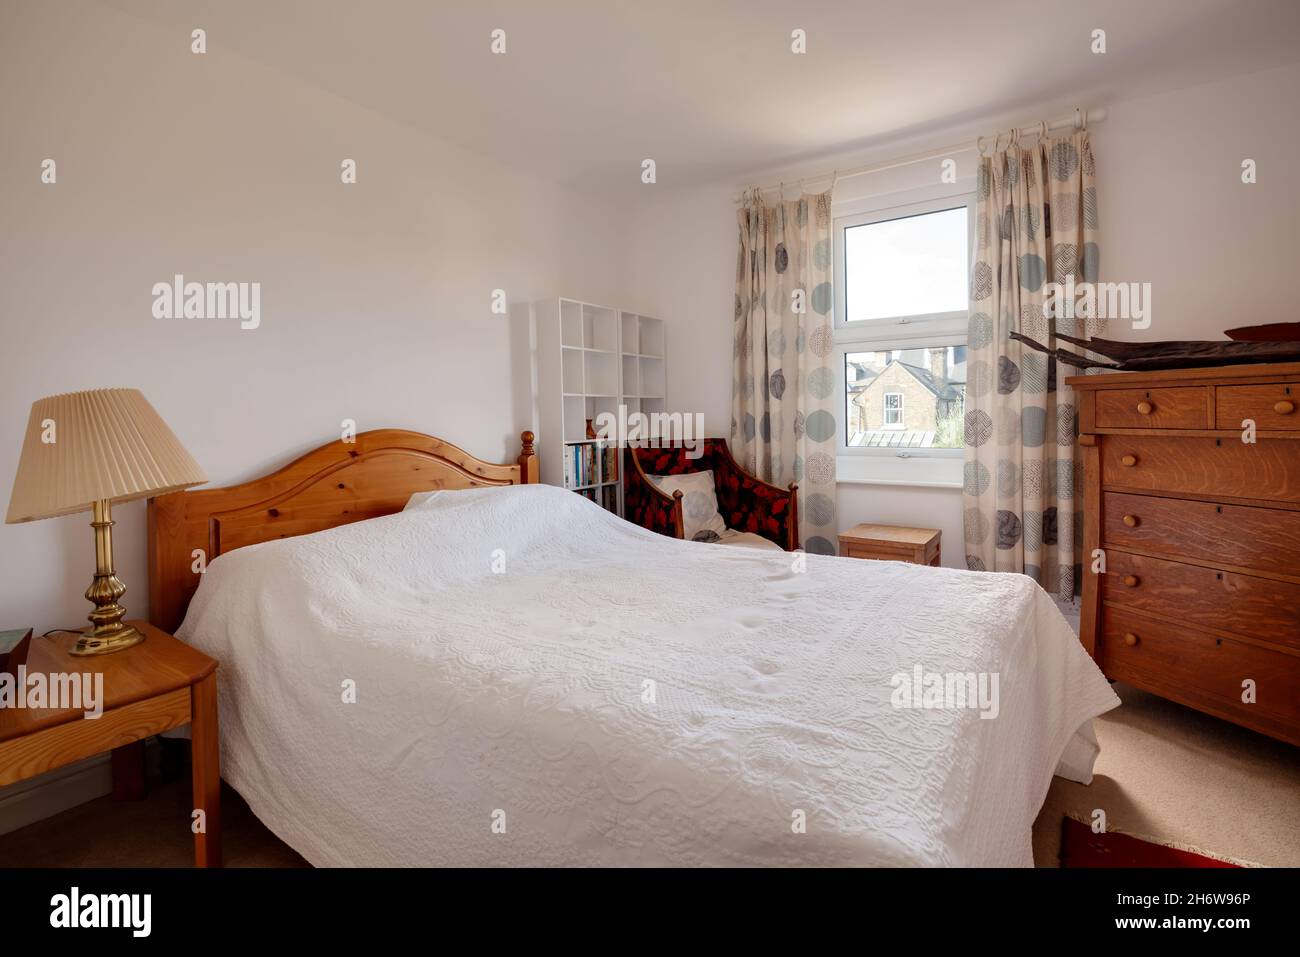 Cambridge, England - October 28 2019: Typical bedroom within British victorian era home with simple decor and traditional looking furniture Stock Photo